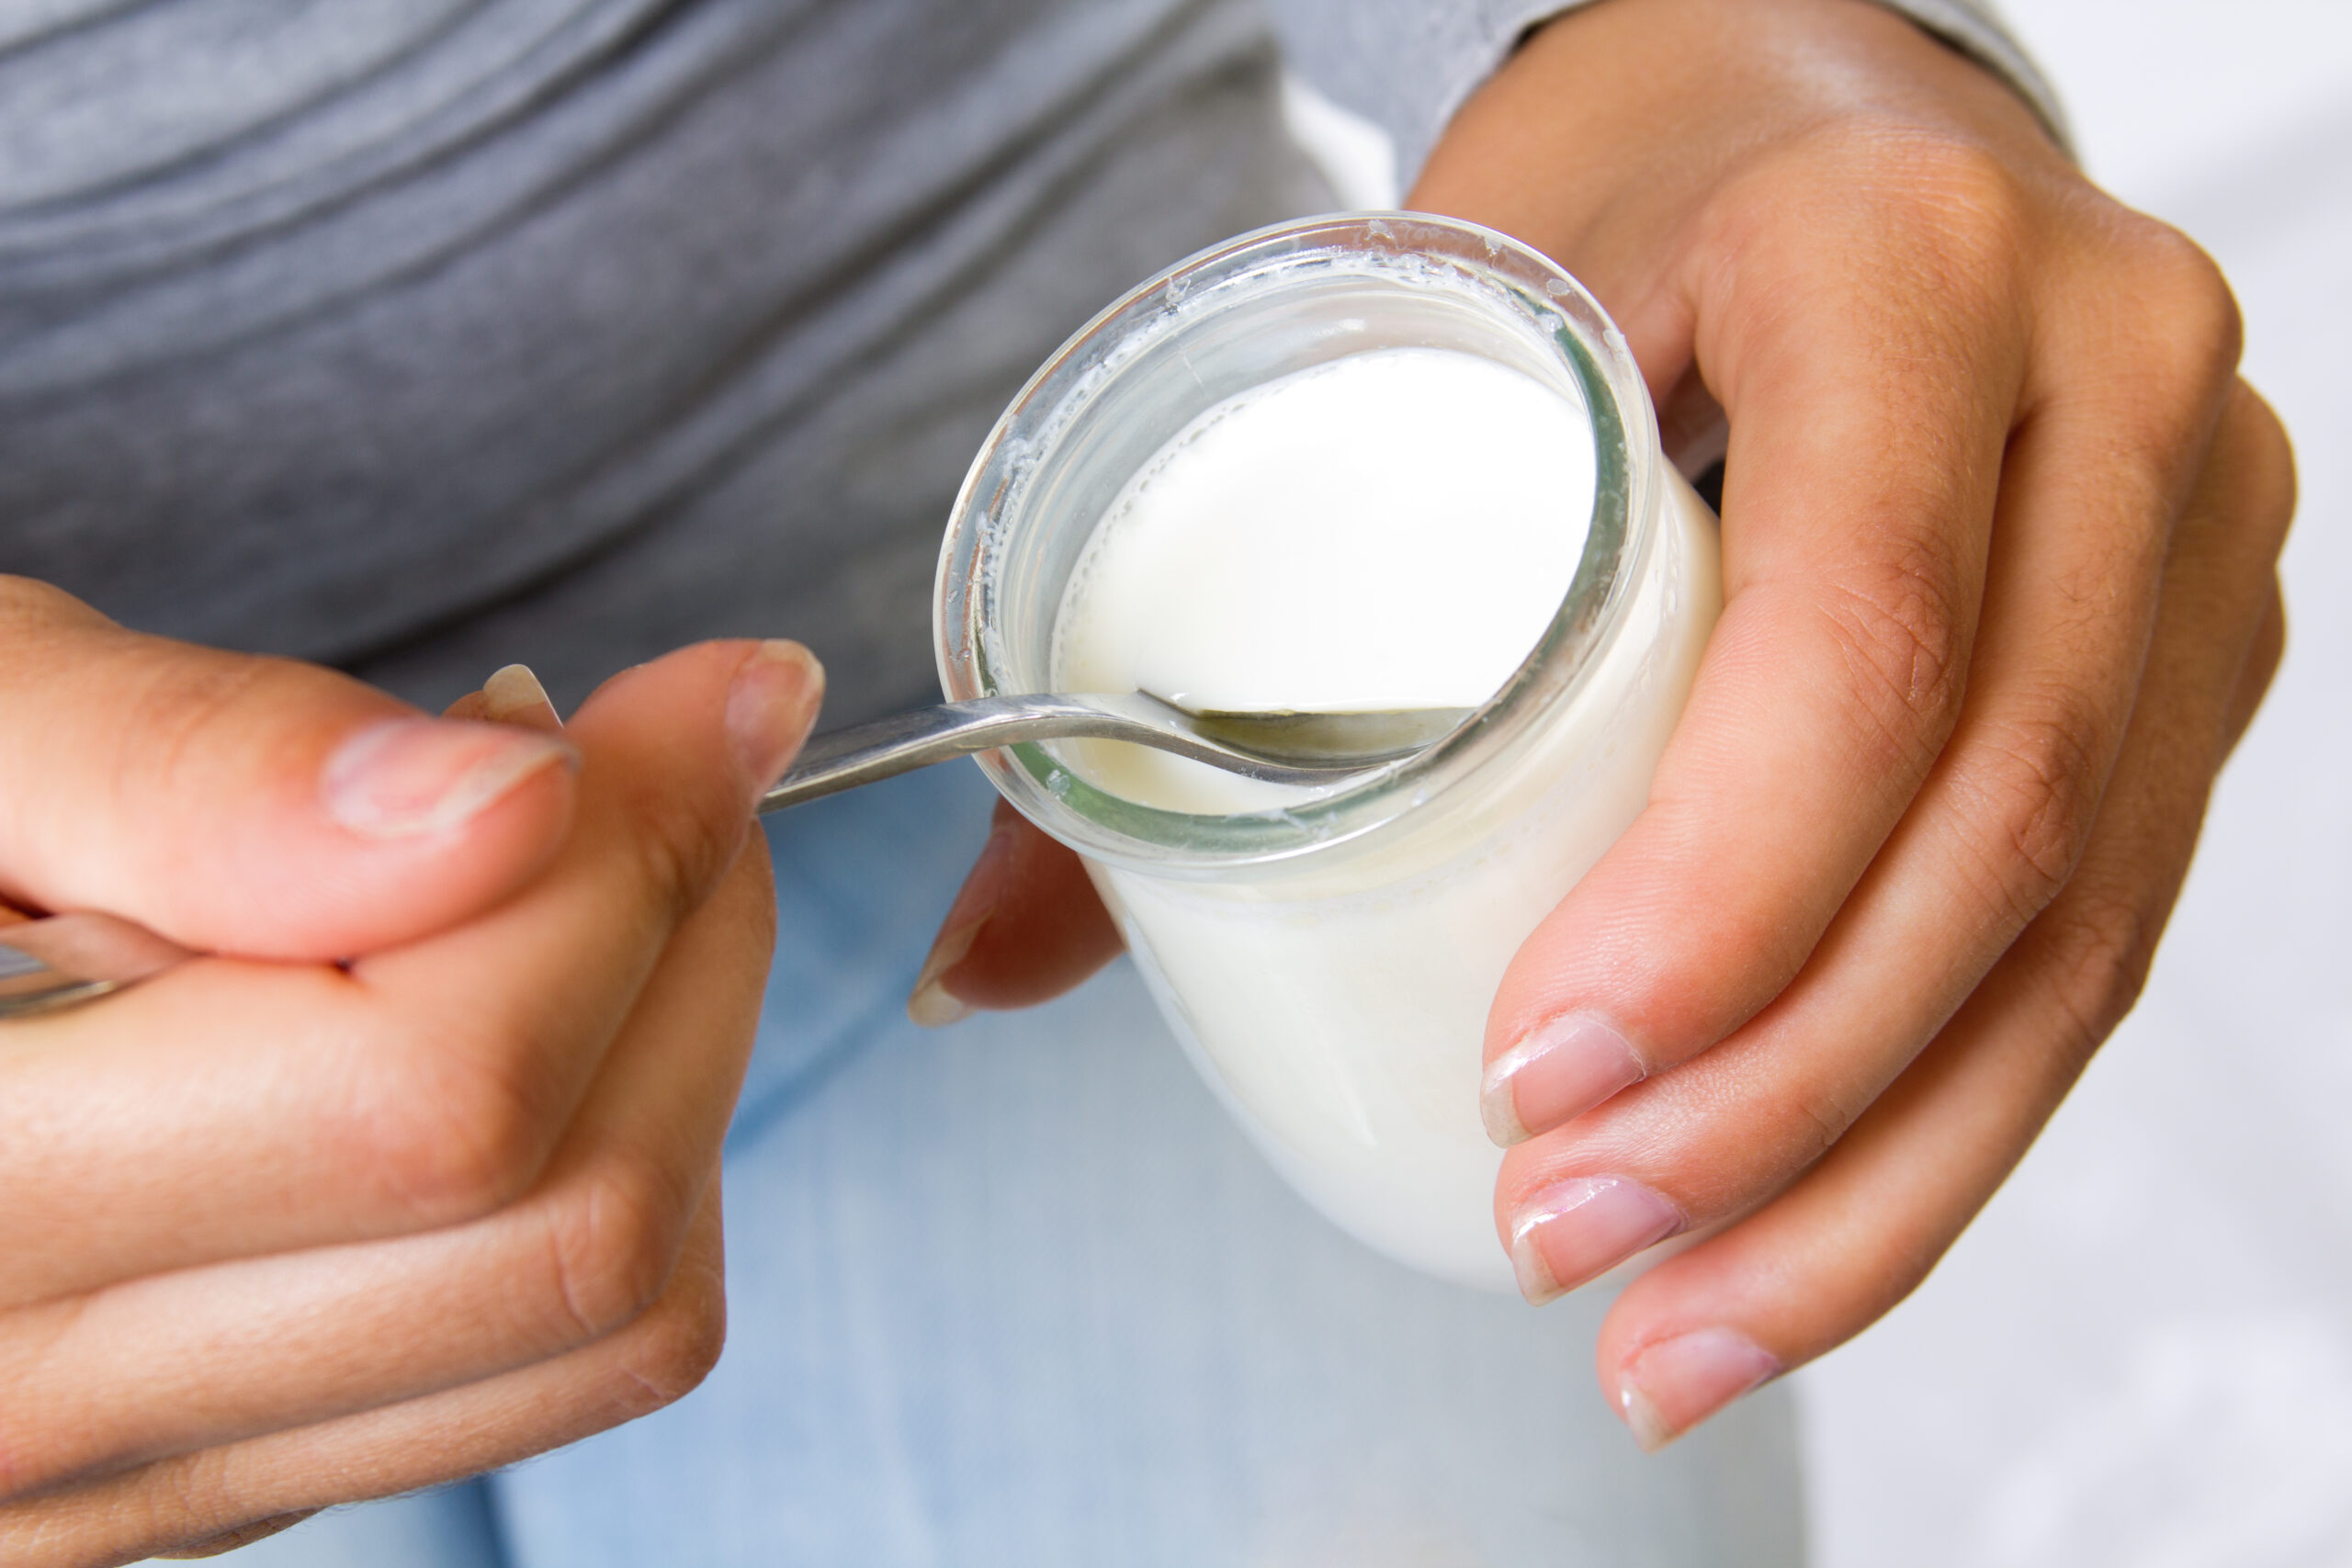 Lactose Intolerance: What Is, Symptoms, Causes, and Diagnosis